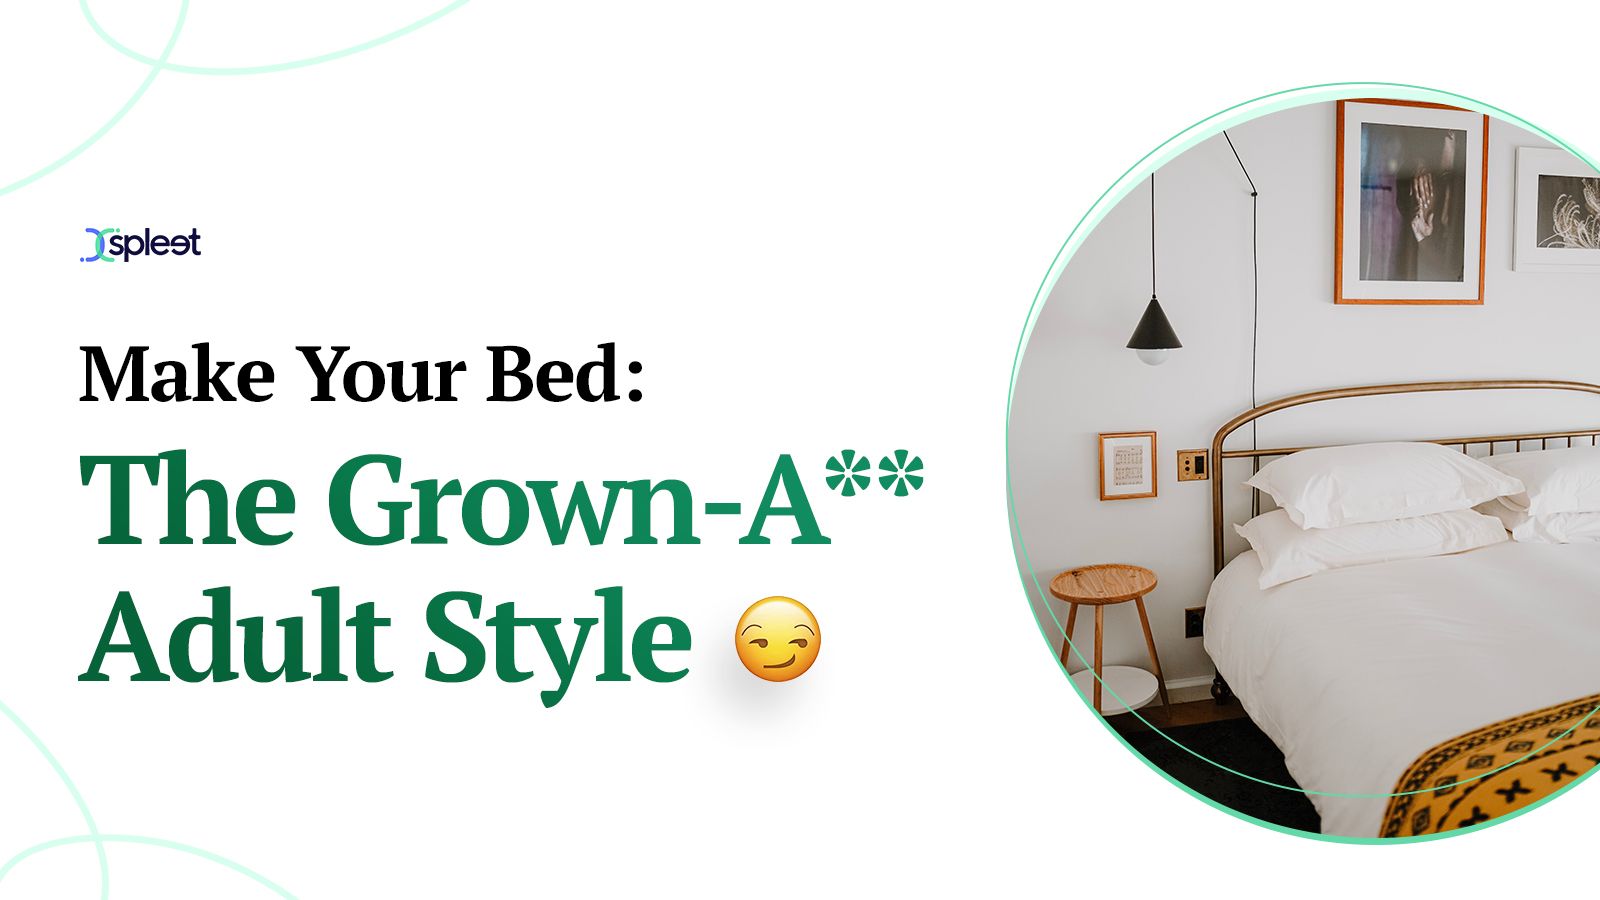 Make Your Bed: The Grown-A** Adult Style